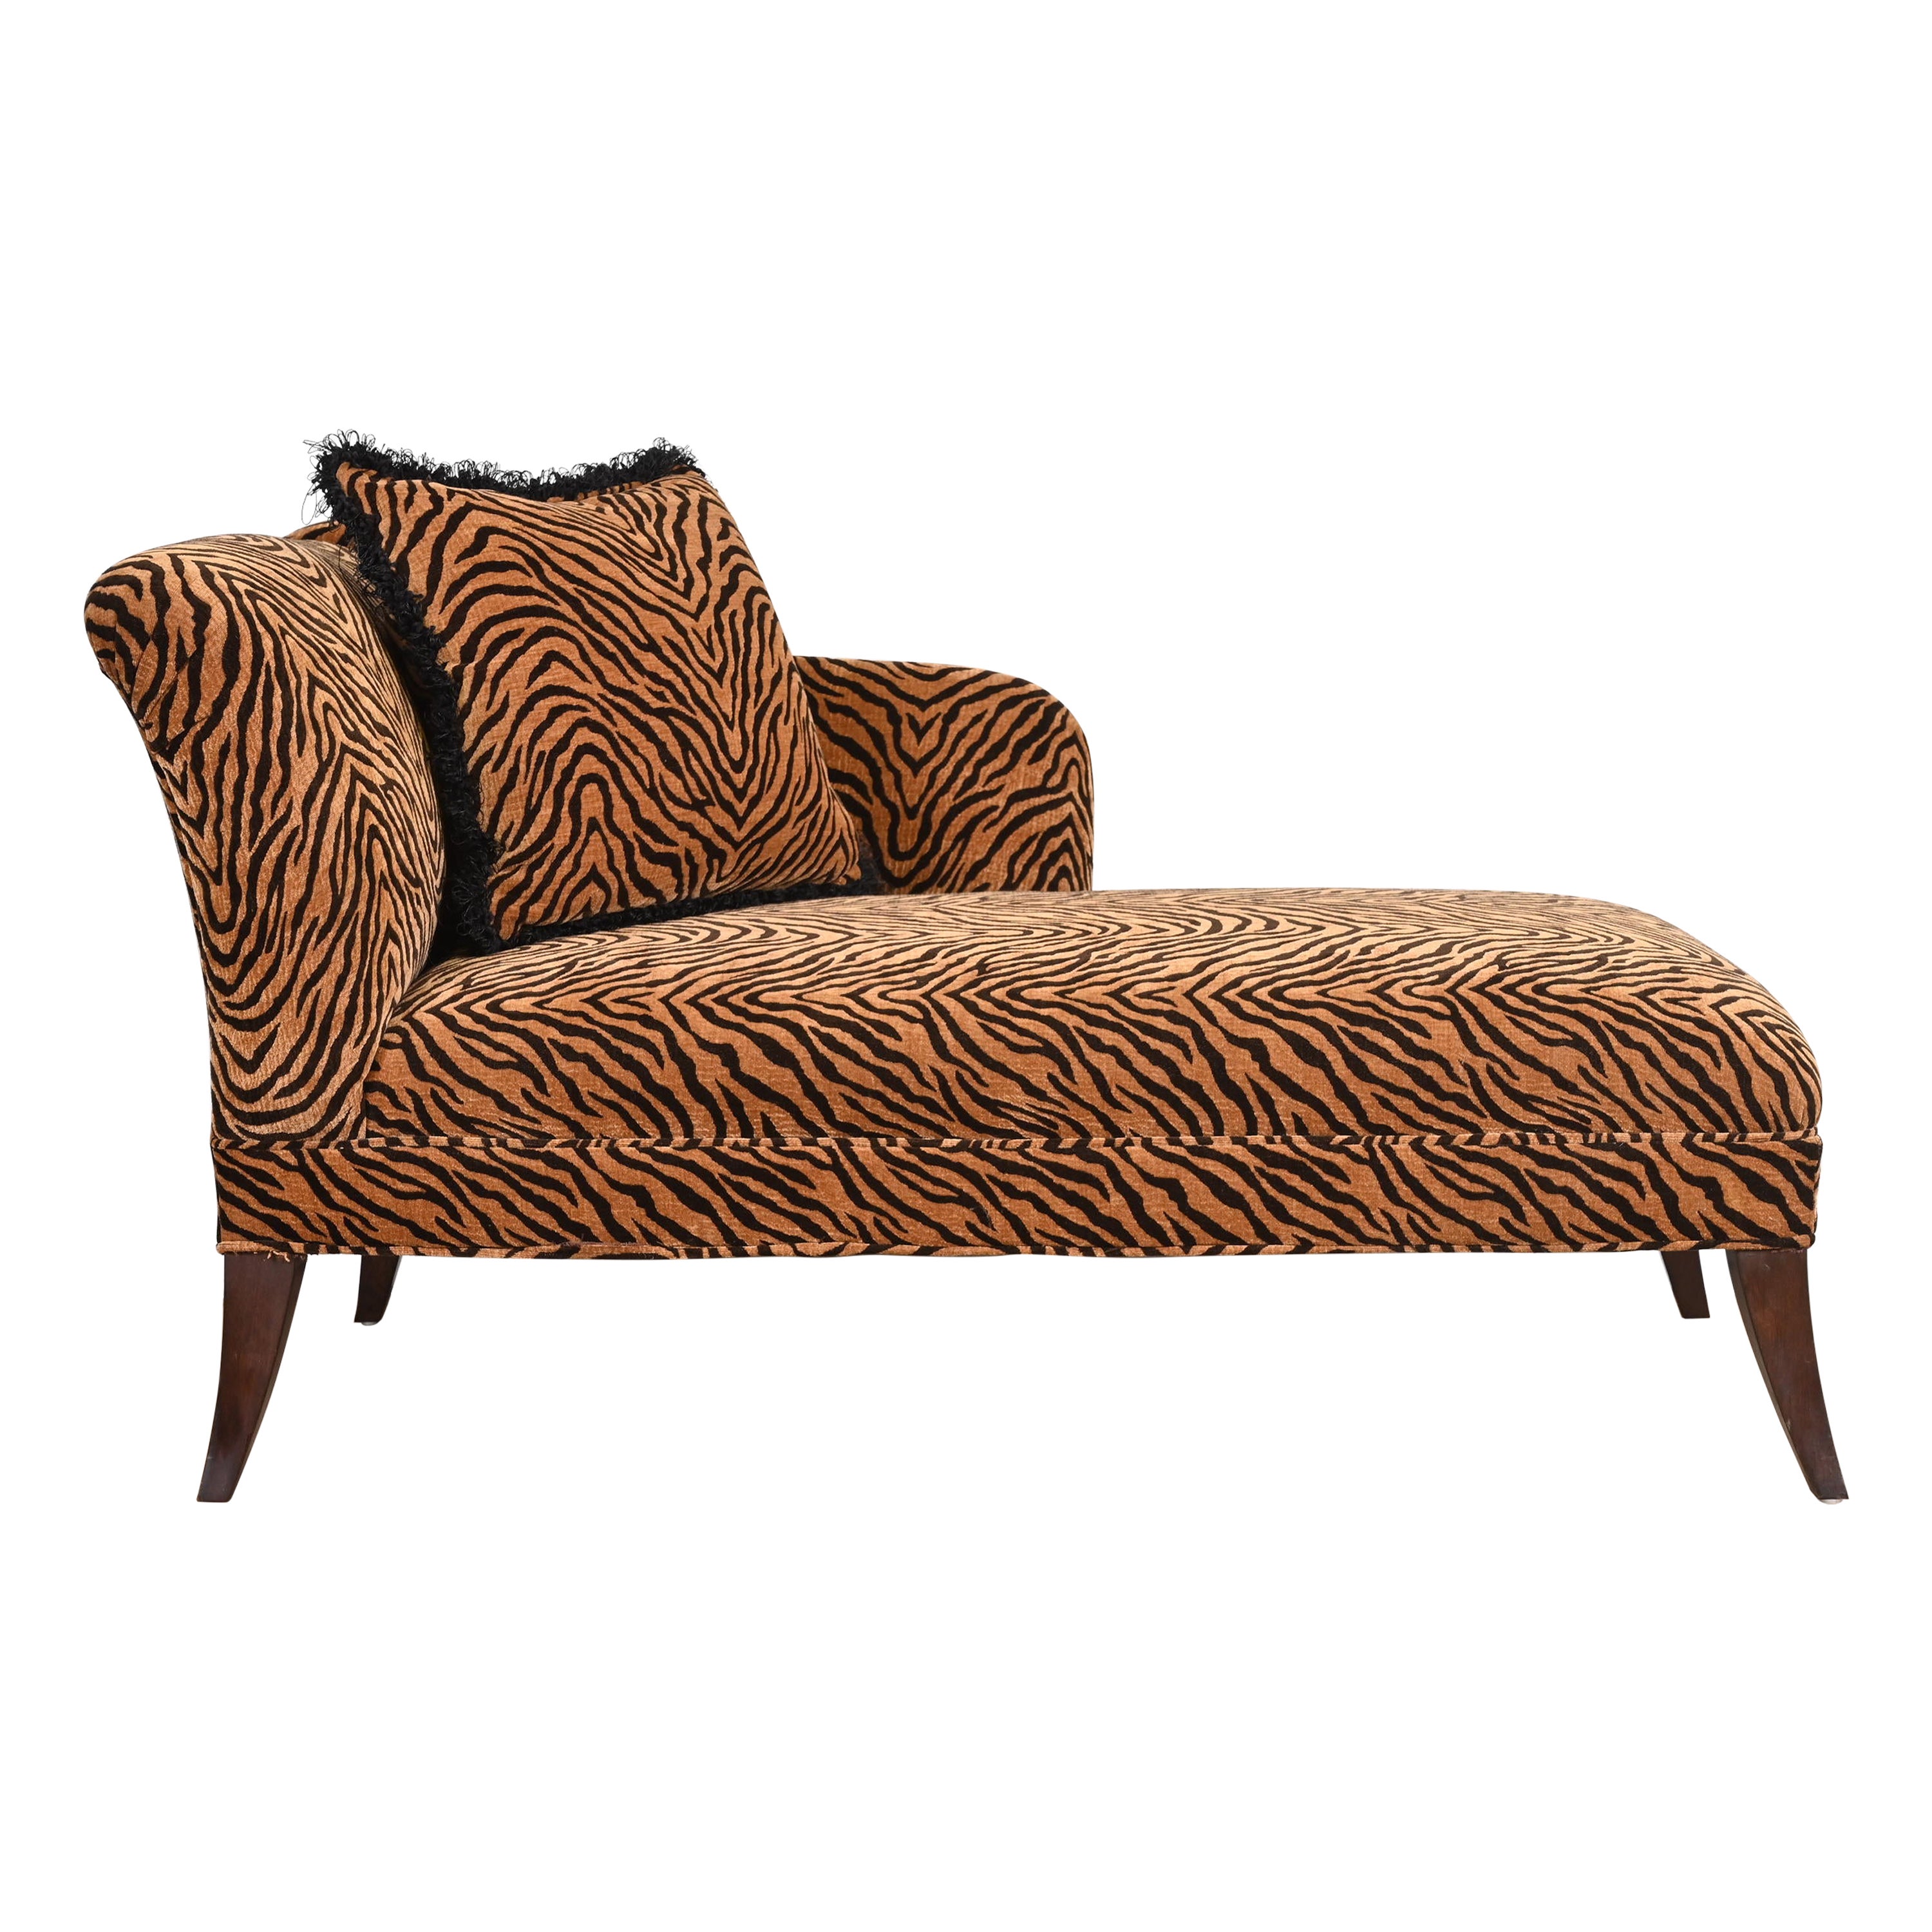 French Regency Tiger Print Upholstered Chaise Lounge For Sale